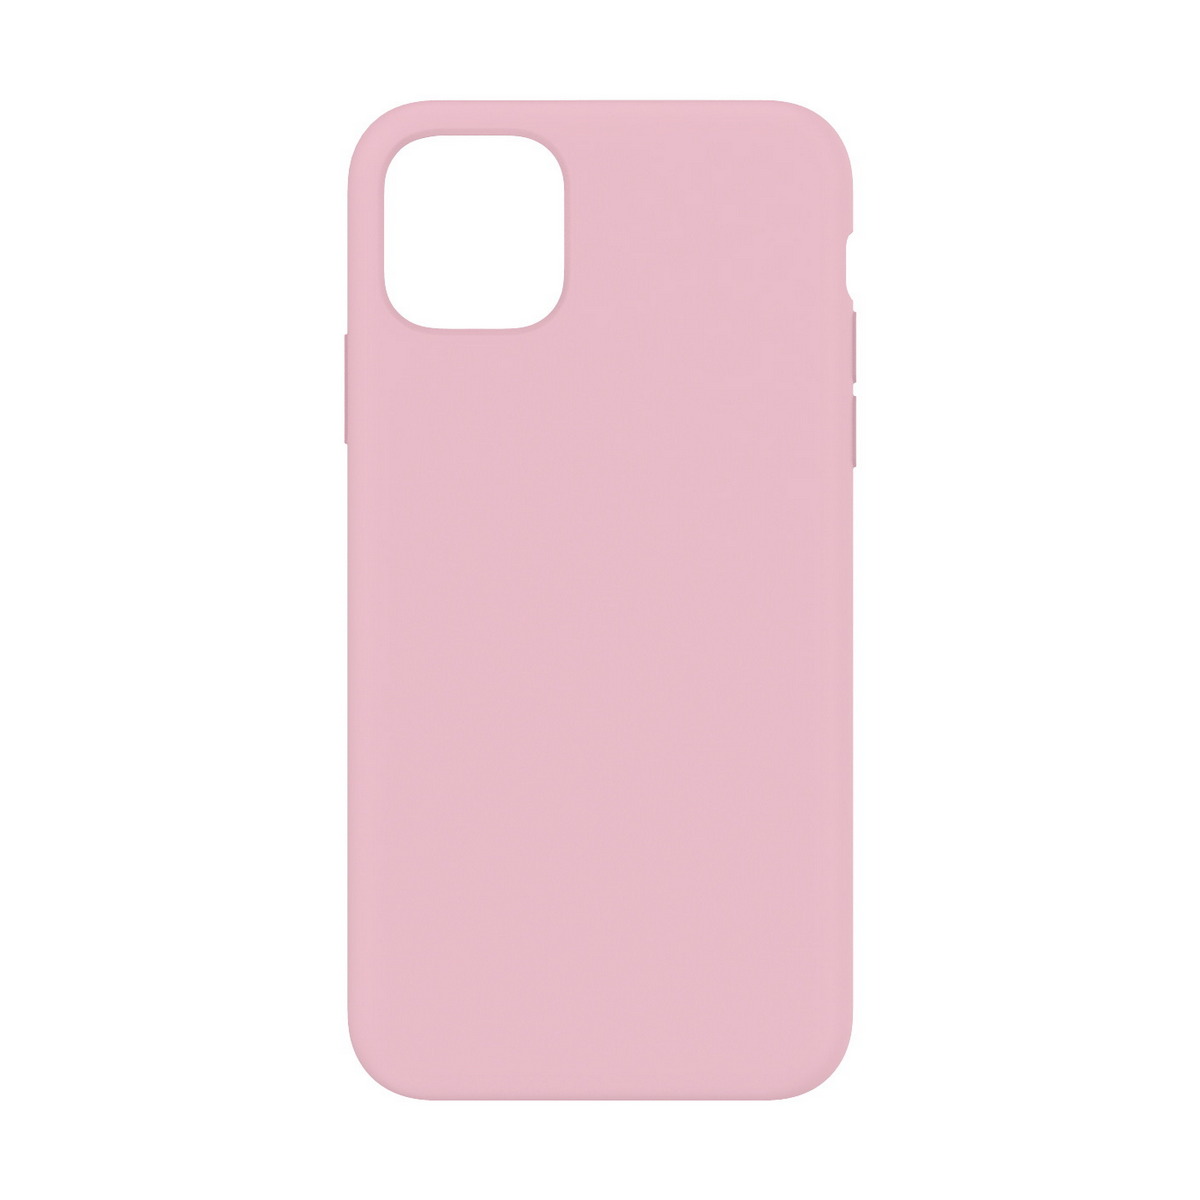 HEAL Case for iPhone 11 Pro Max (Pink) Case Silicone